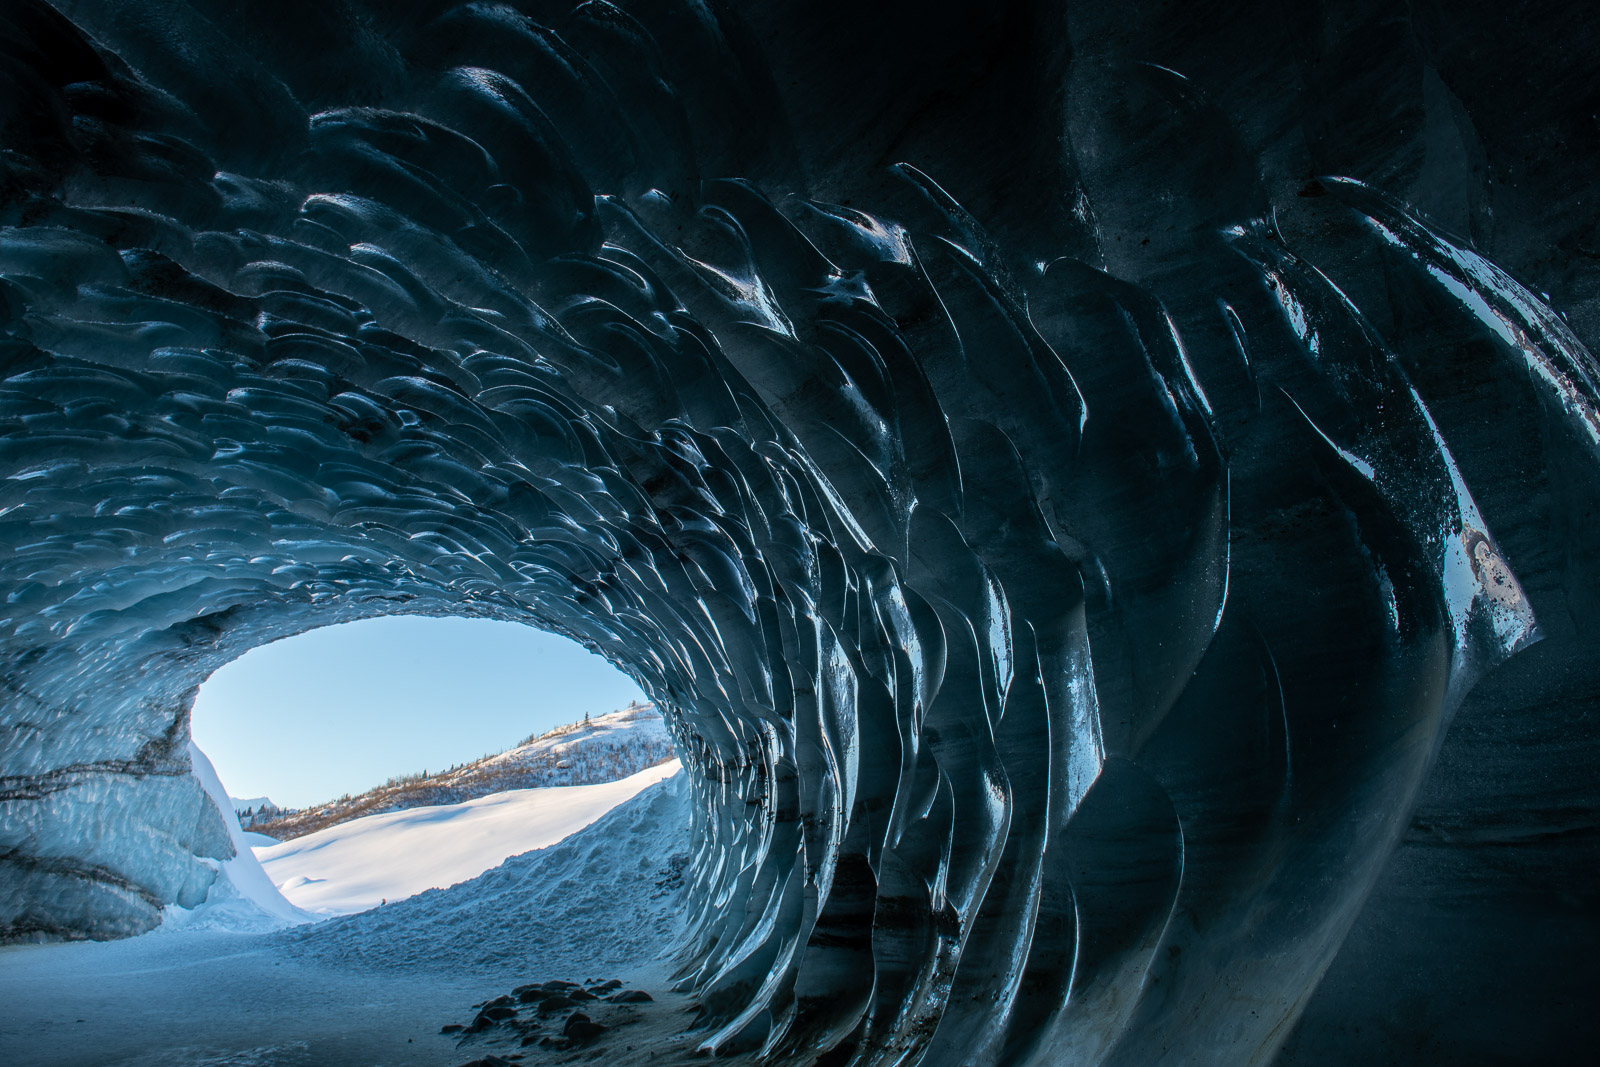 Light from the outside shines on the textures of the scalloped walls of the ice cave at Castner Glacier, Alaska.